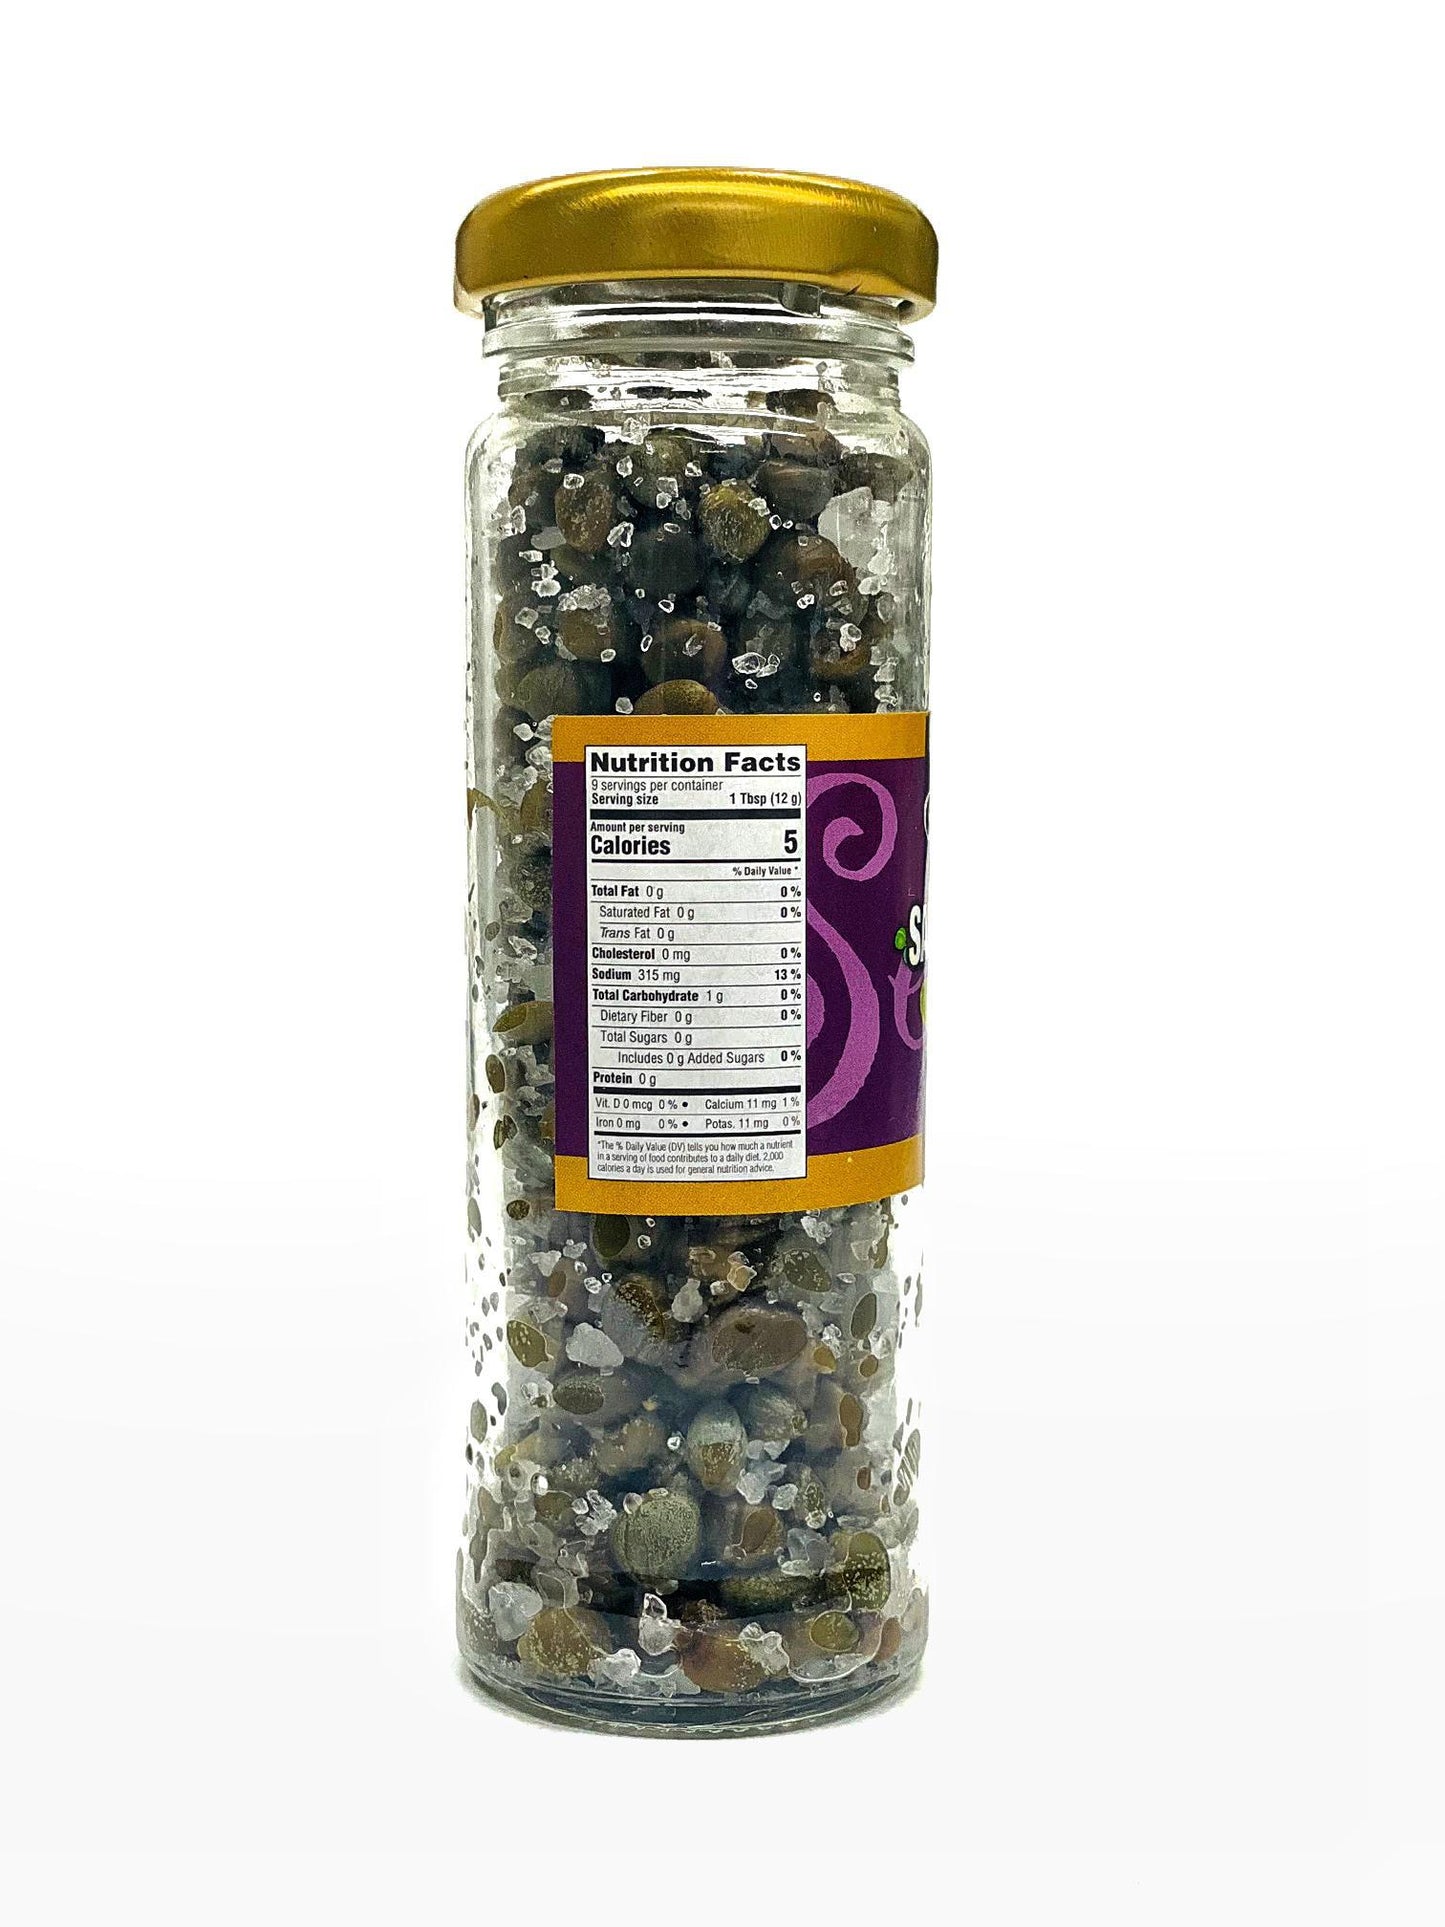 Selena Salted Capers, 3.7 oz